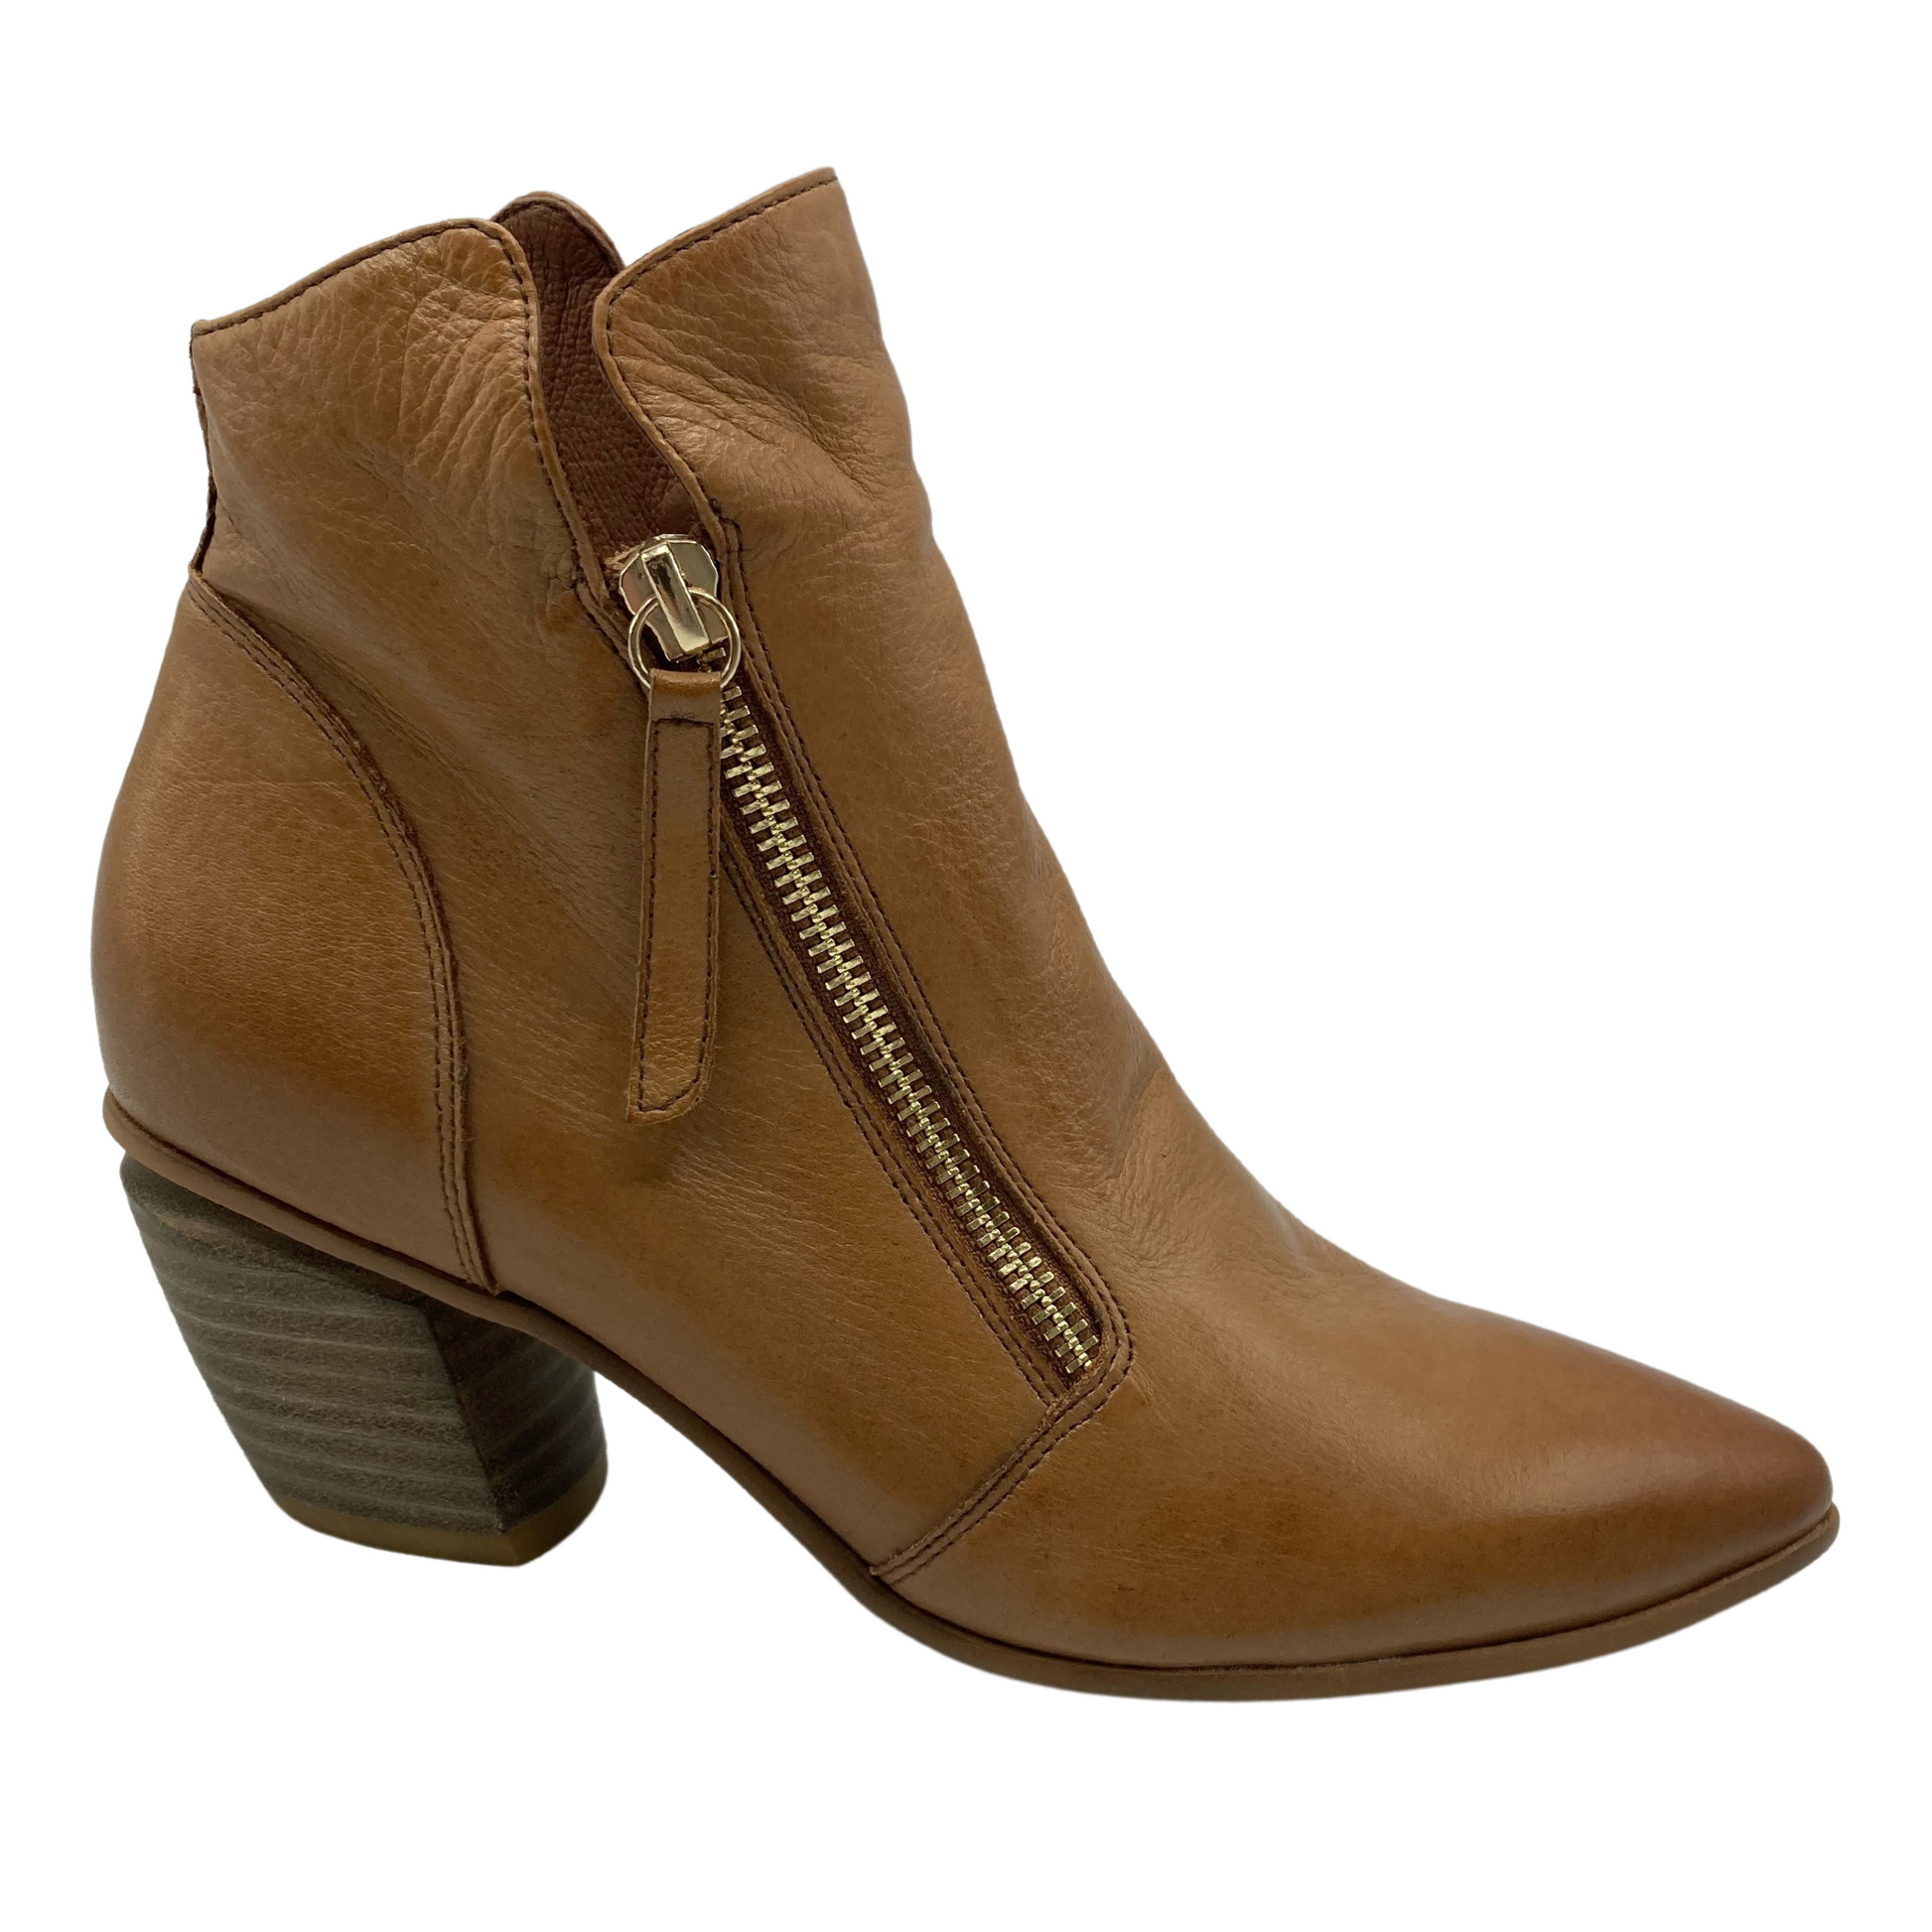 Right facing profile view of chunky heeled leather boot with pointed toe